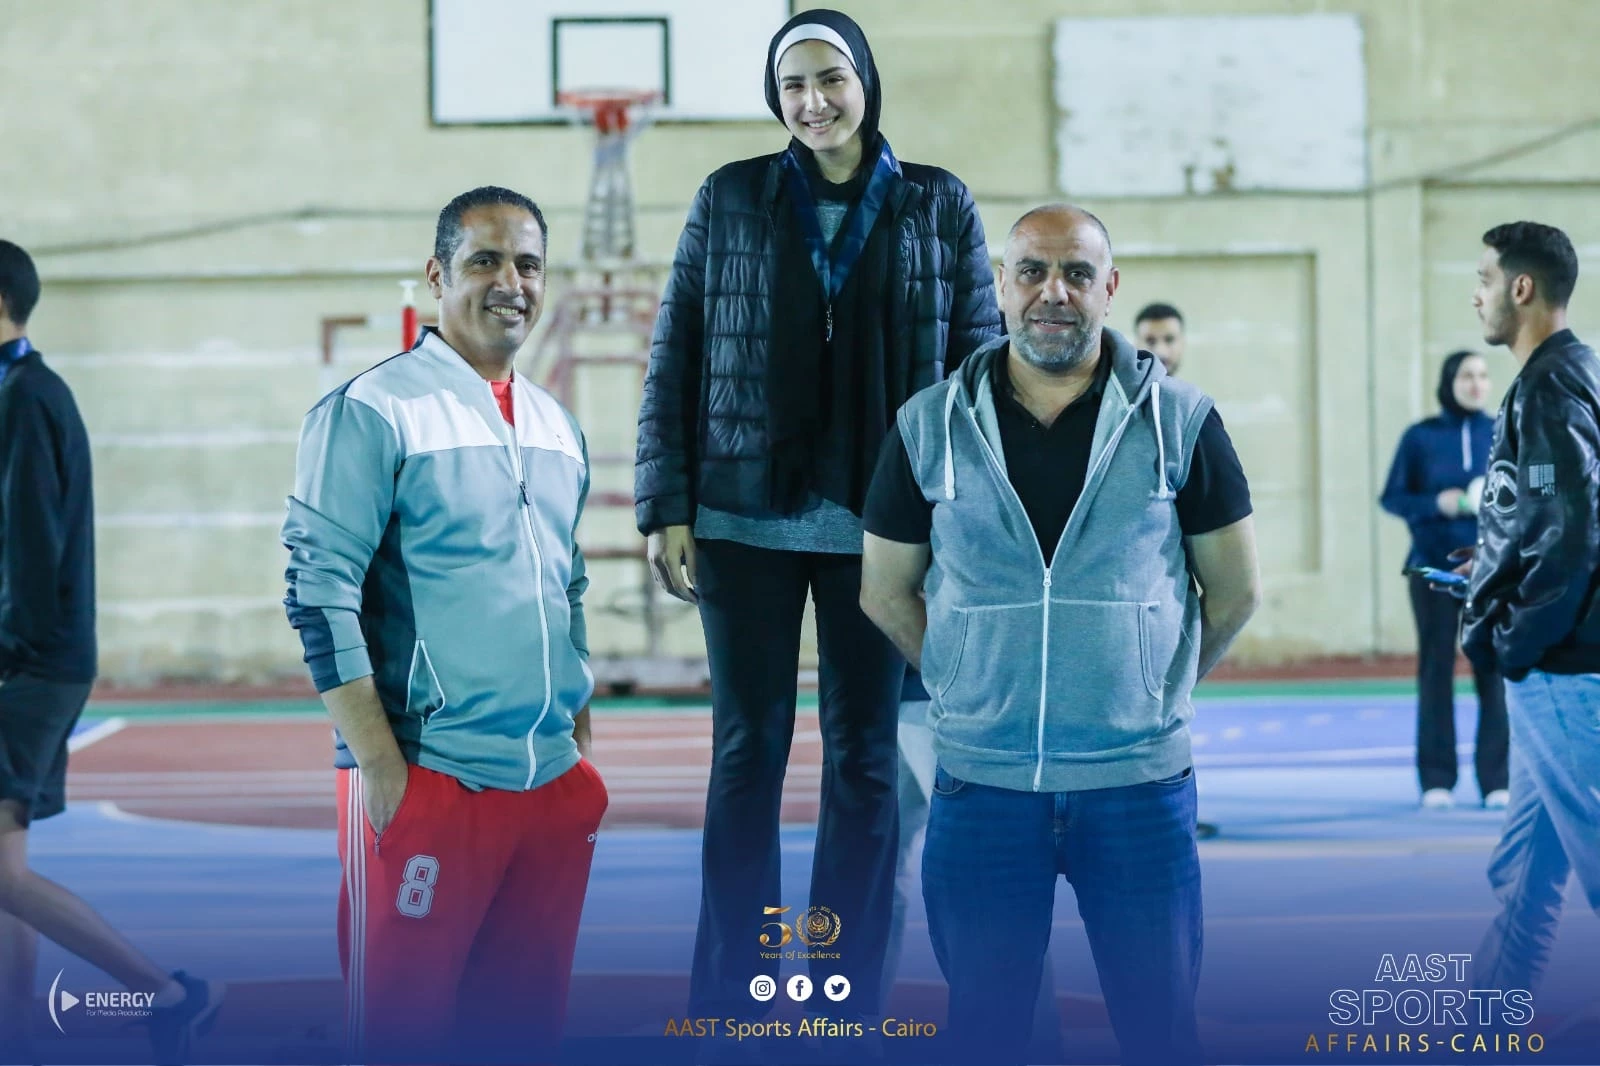 The academy was crowned in Cairo with the first place Cup in the student championship and the first place Cup in the female student championship in the private universities Speedball Championship8